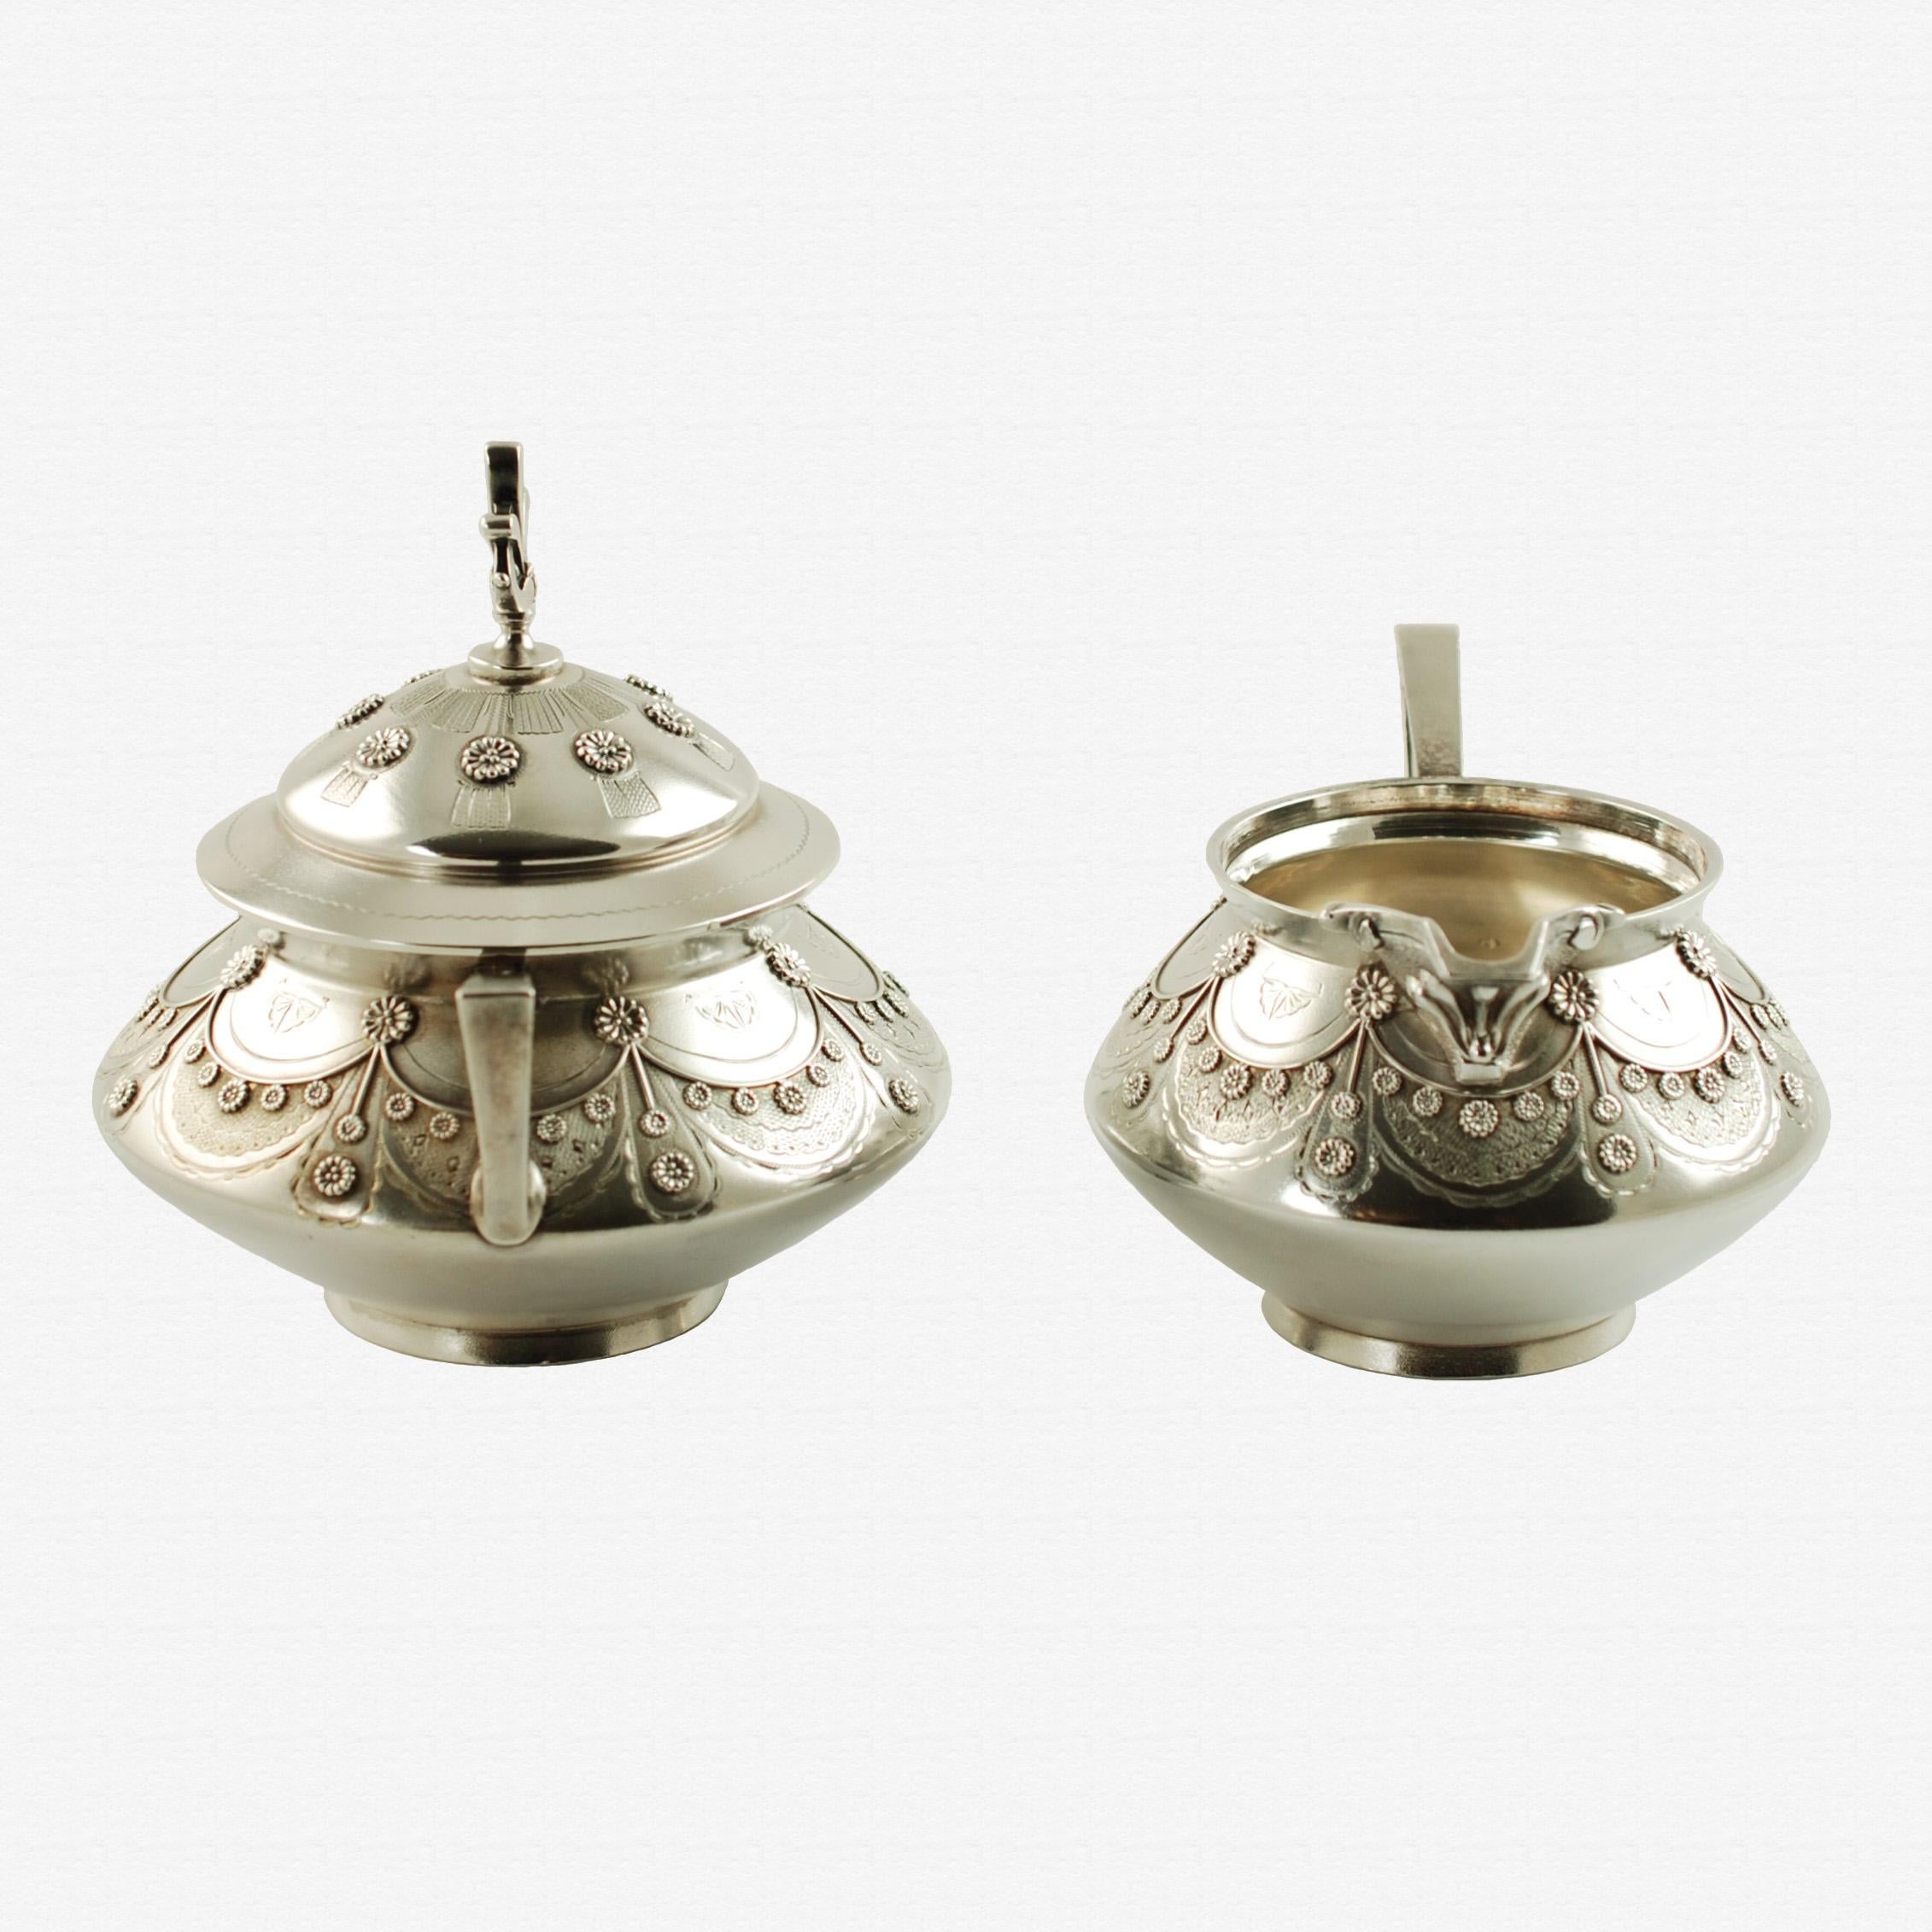 Antique Tiffany & Co Aesthetic Movement sterling silver cream and sugar. This striking 19th century matched cream and sugar set was made by renowned jeweler and silversmith, Tiffany & Company. Tiffany was founded in 1837 by Charles Lewis Tiffany and